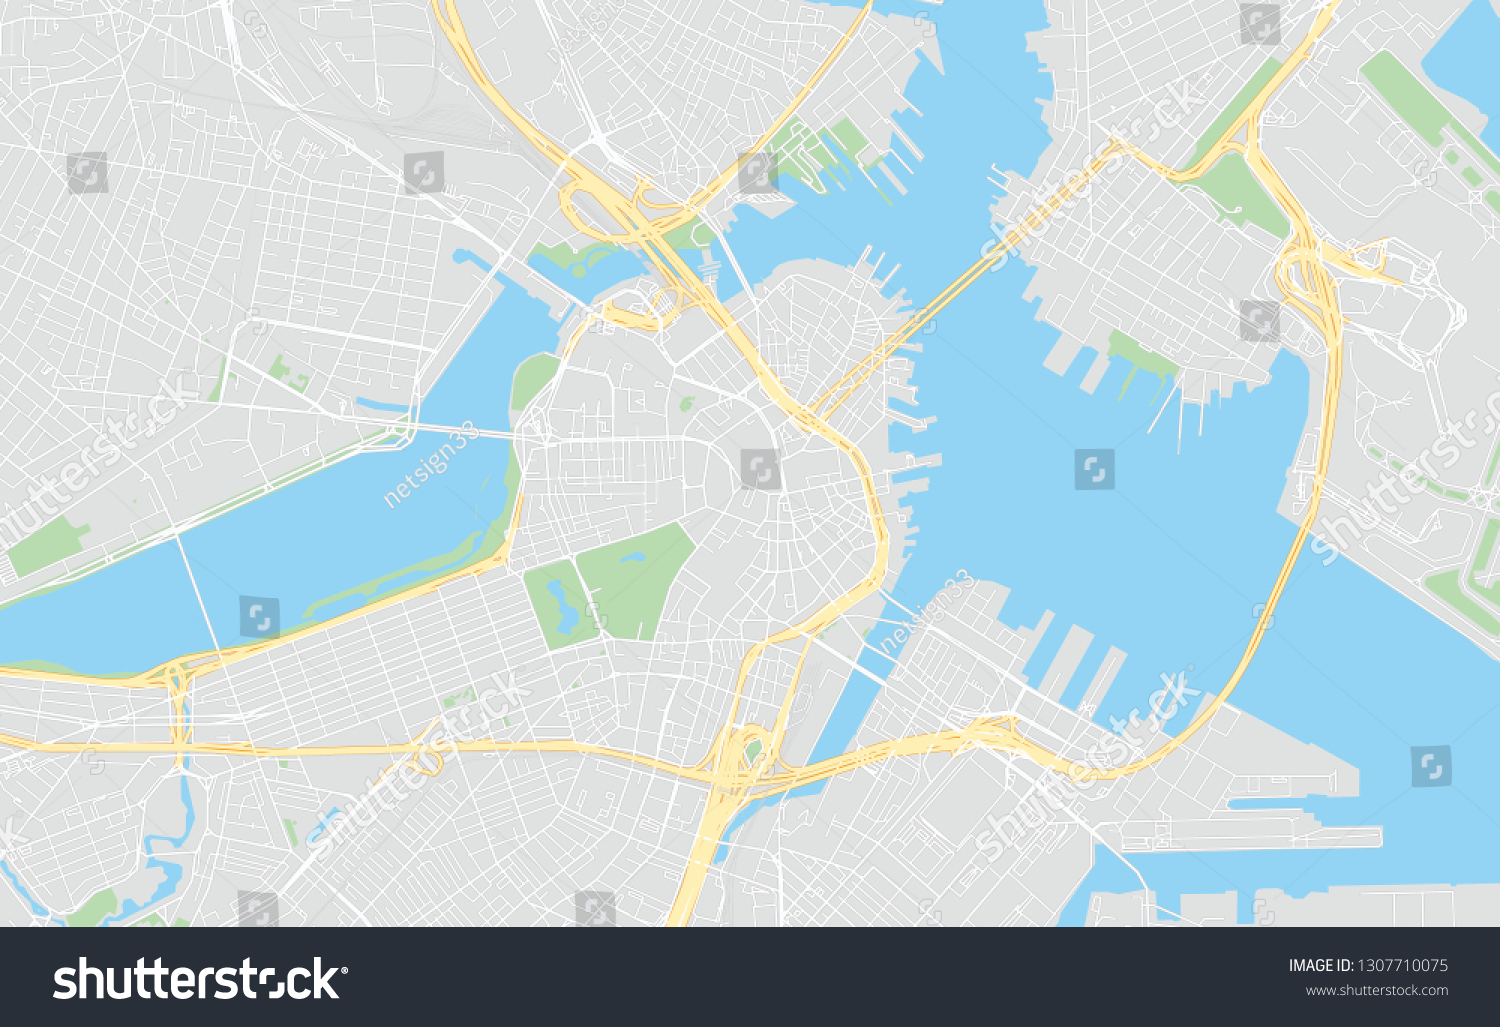 SVG of Boston, Massachusetts, classic colors, printable map, designed as a high quality background for high contrast icons and information in the foreground. svg